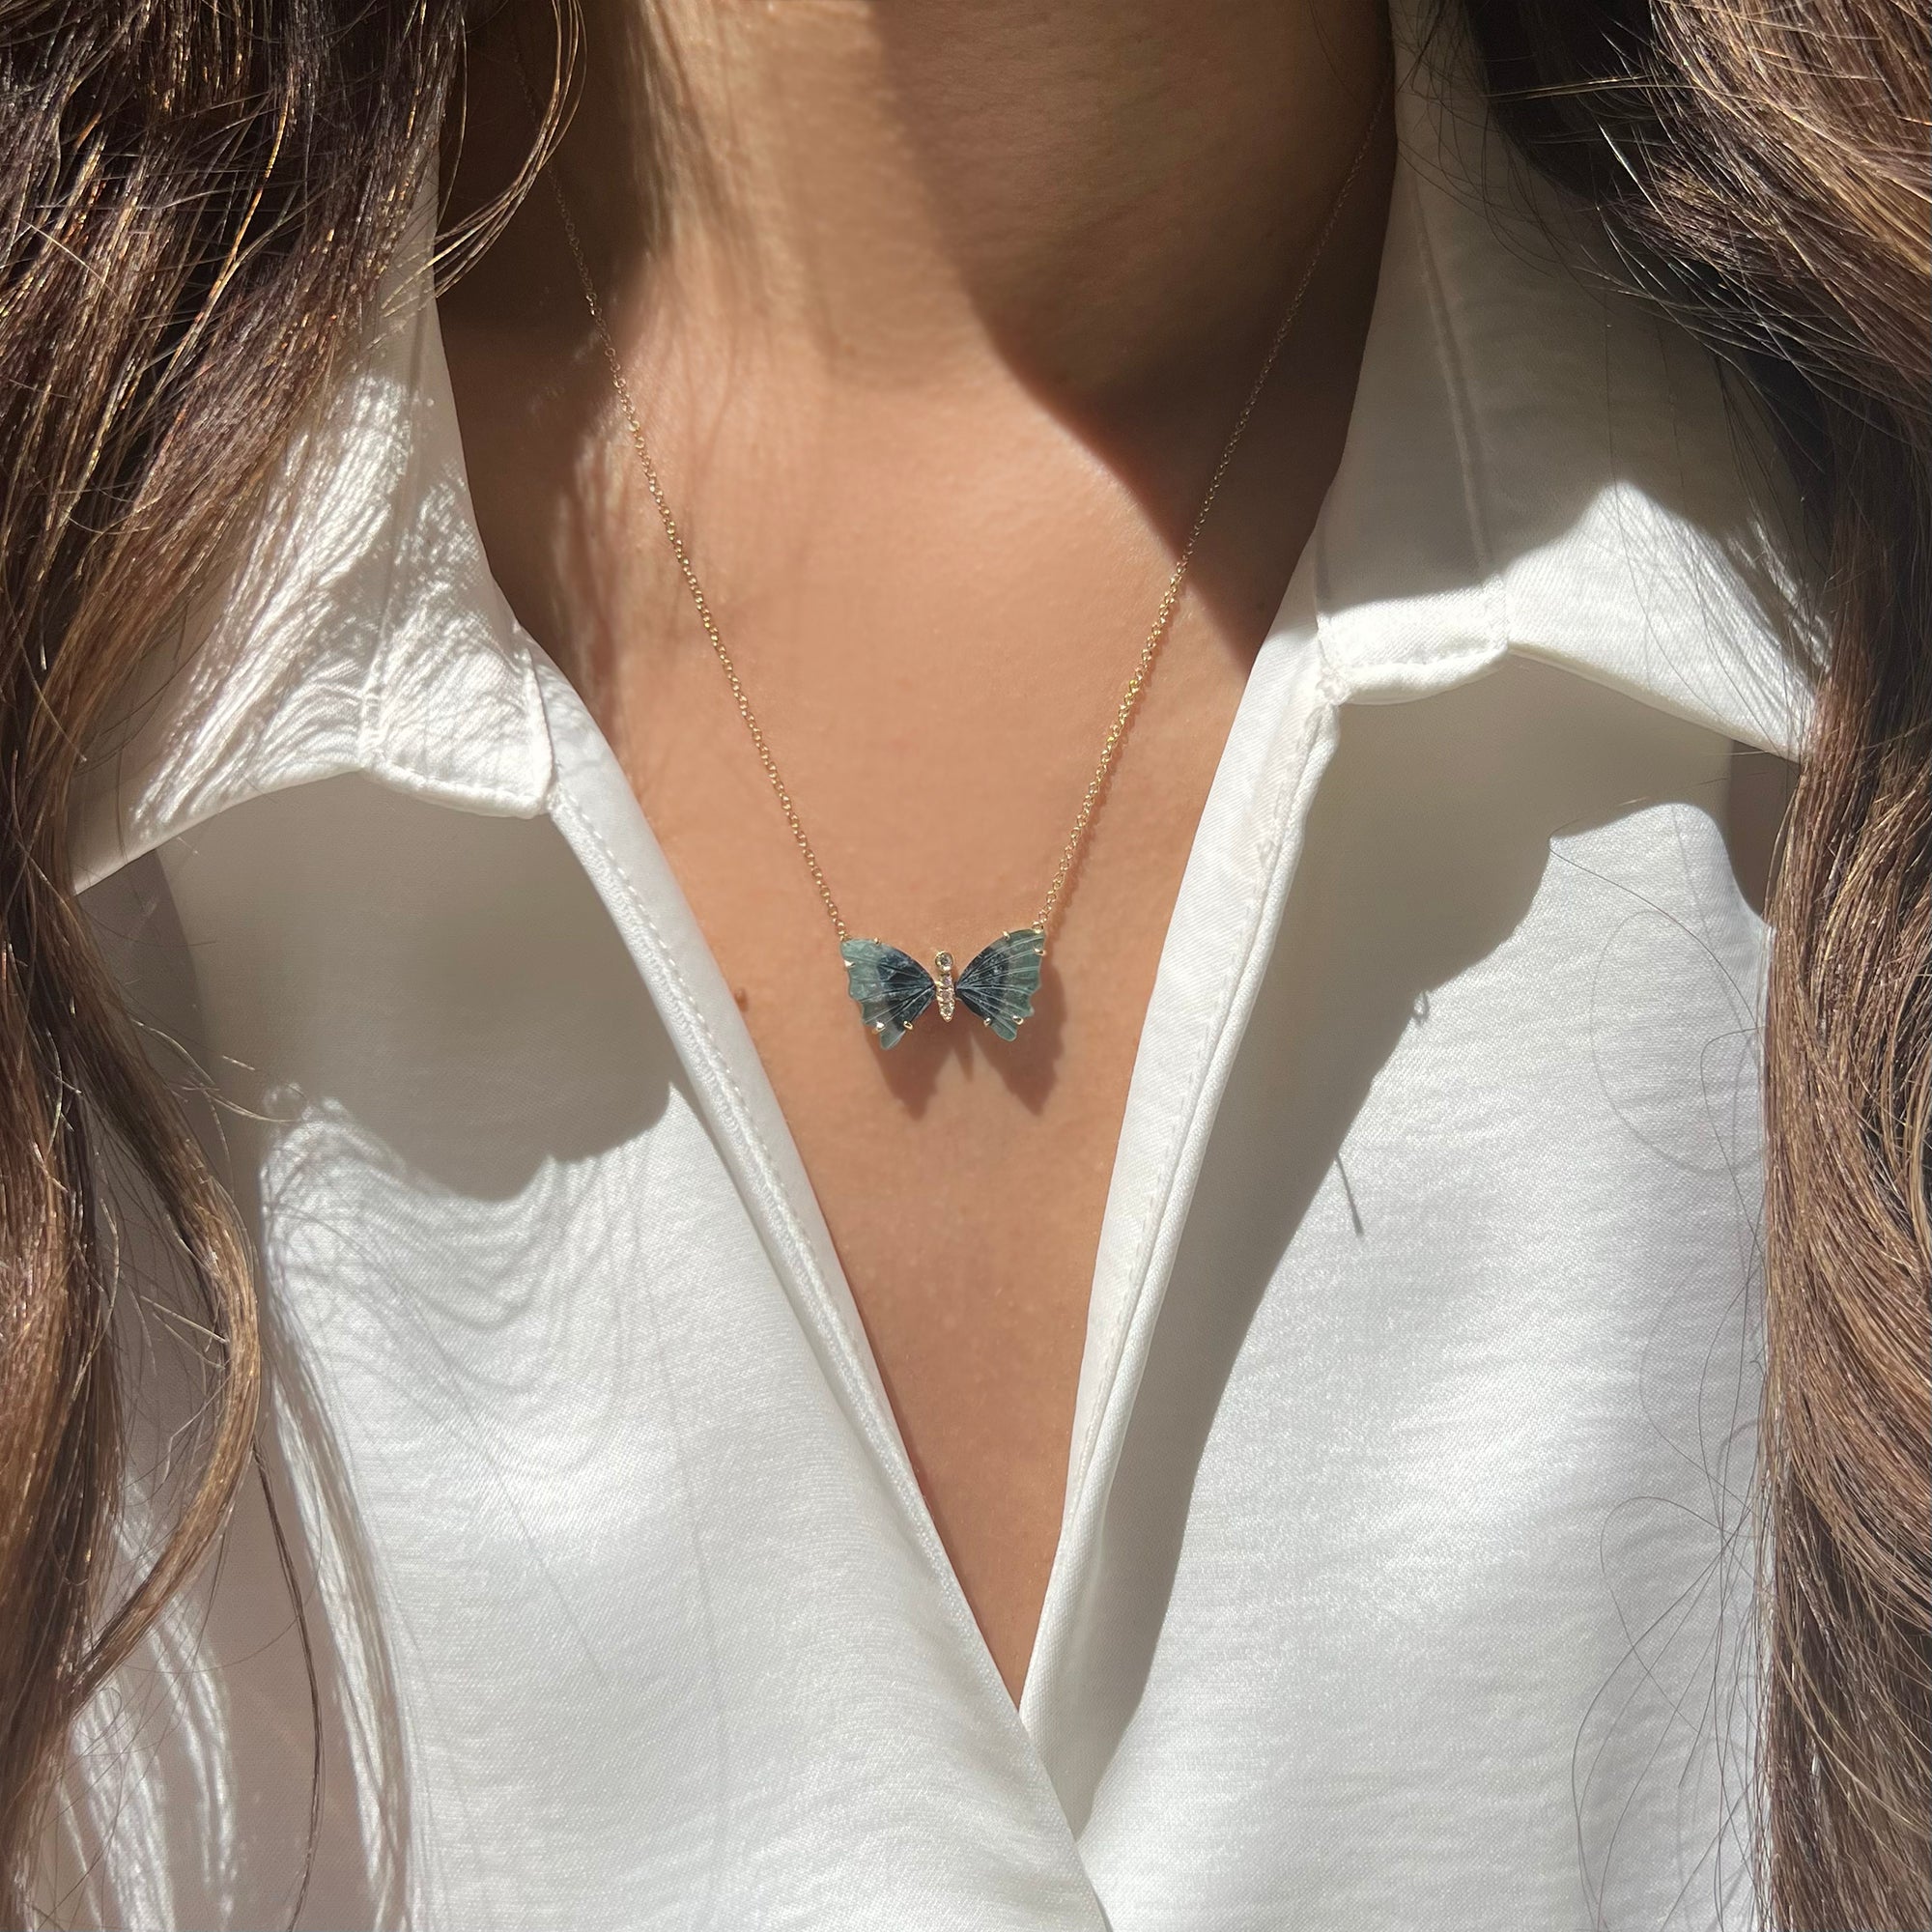 mini blue and navy butterfly necklace with diamonds pronged